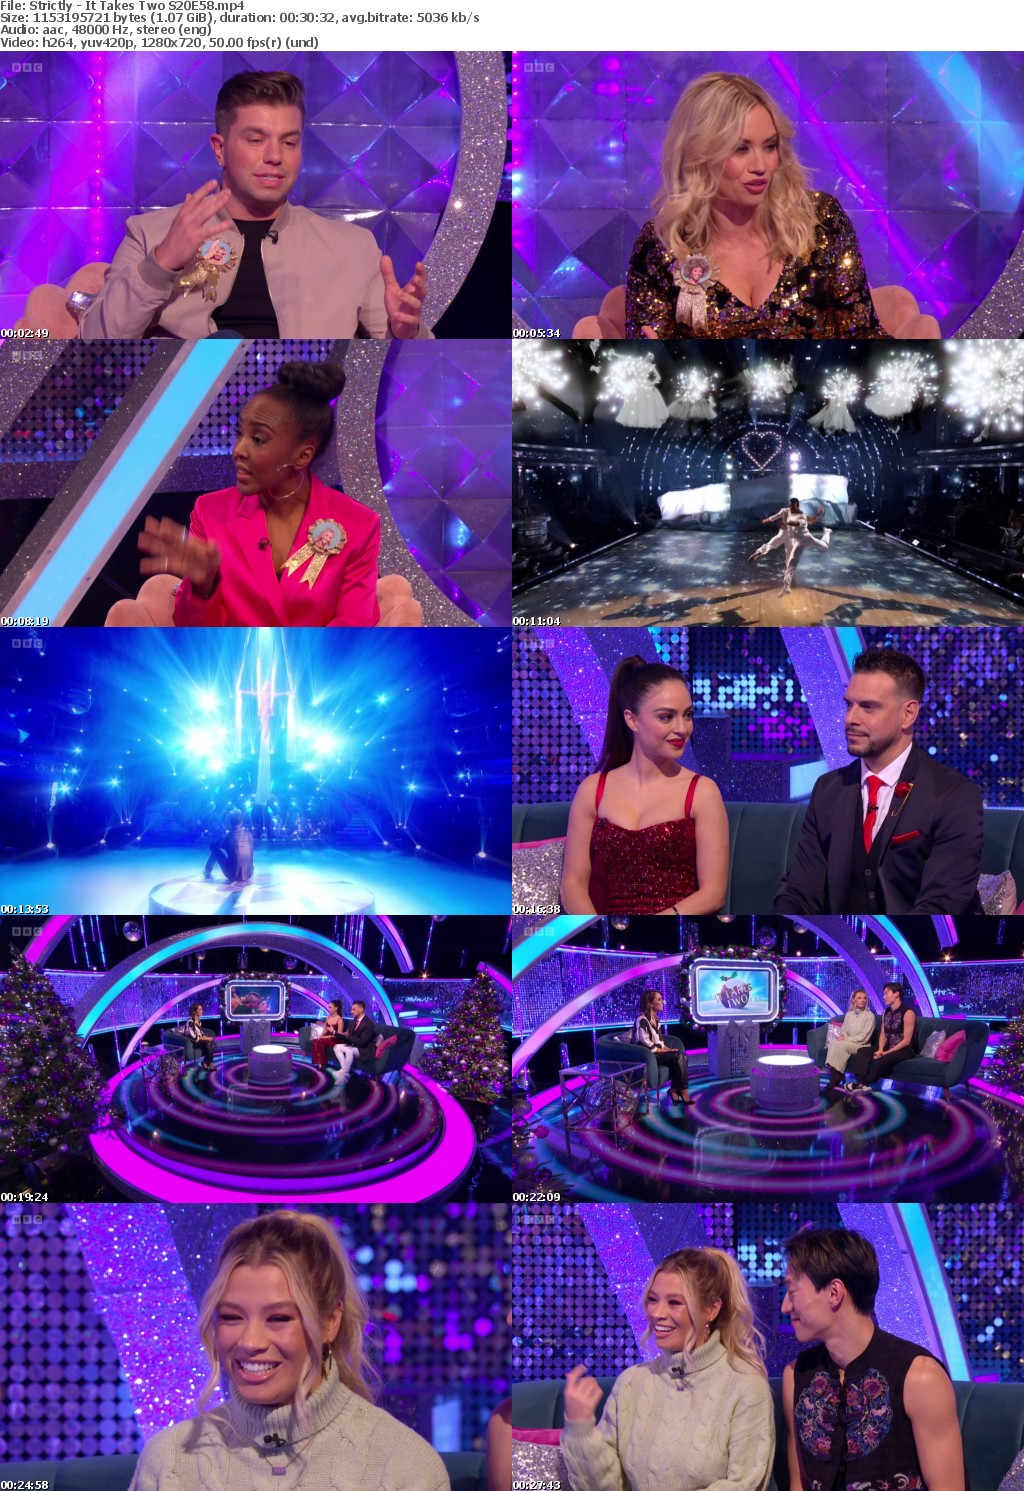 Strictly - It Takes Two S20E58 (1280x720p HD, 50fps, soft Eng subs)